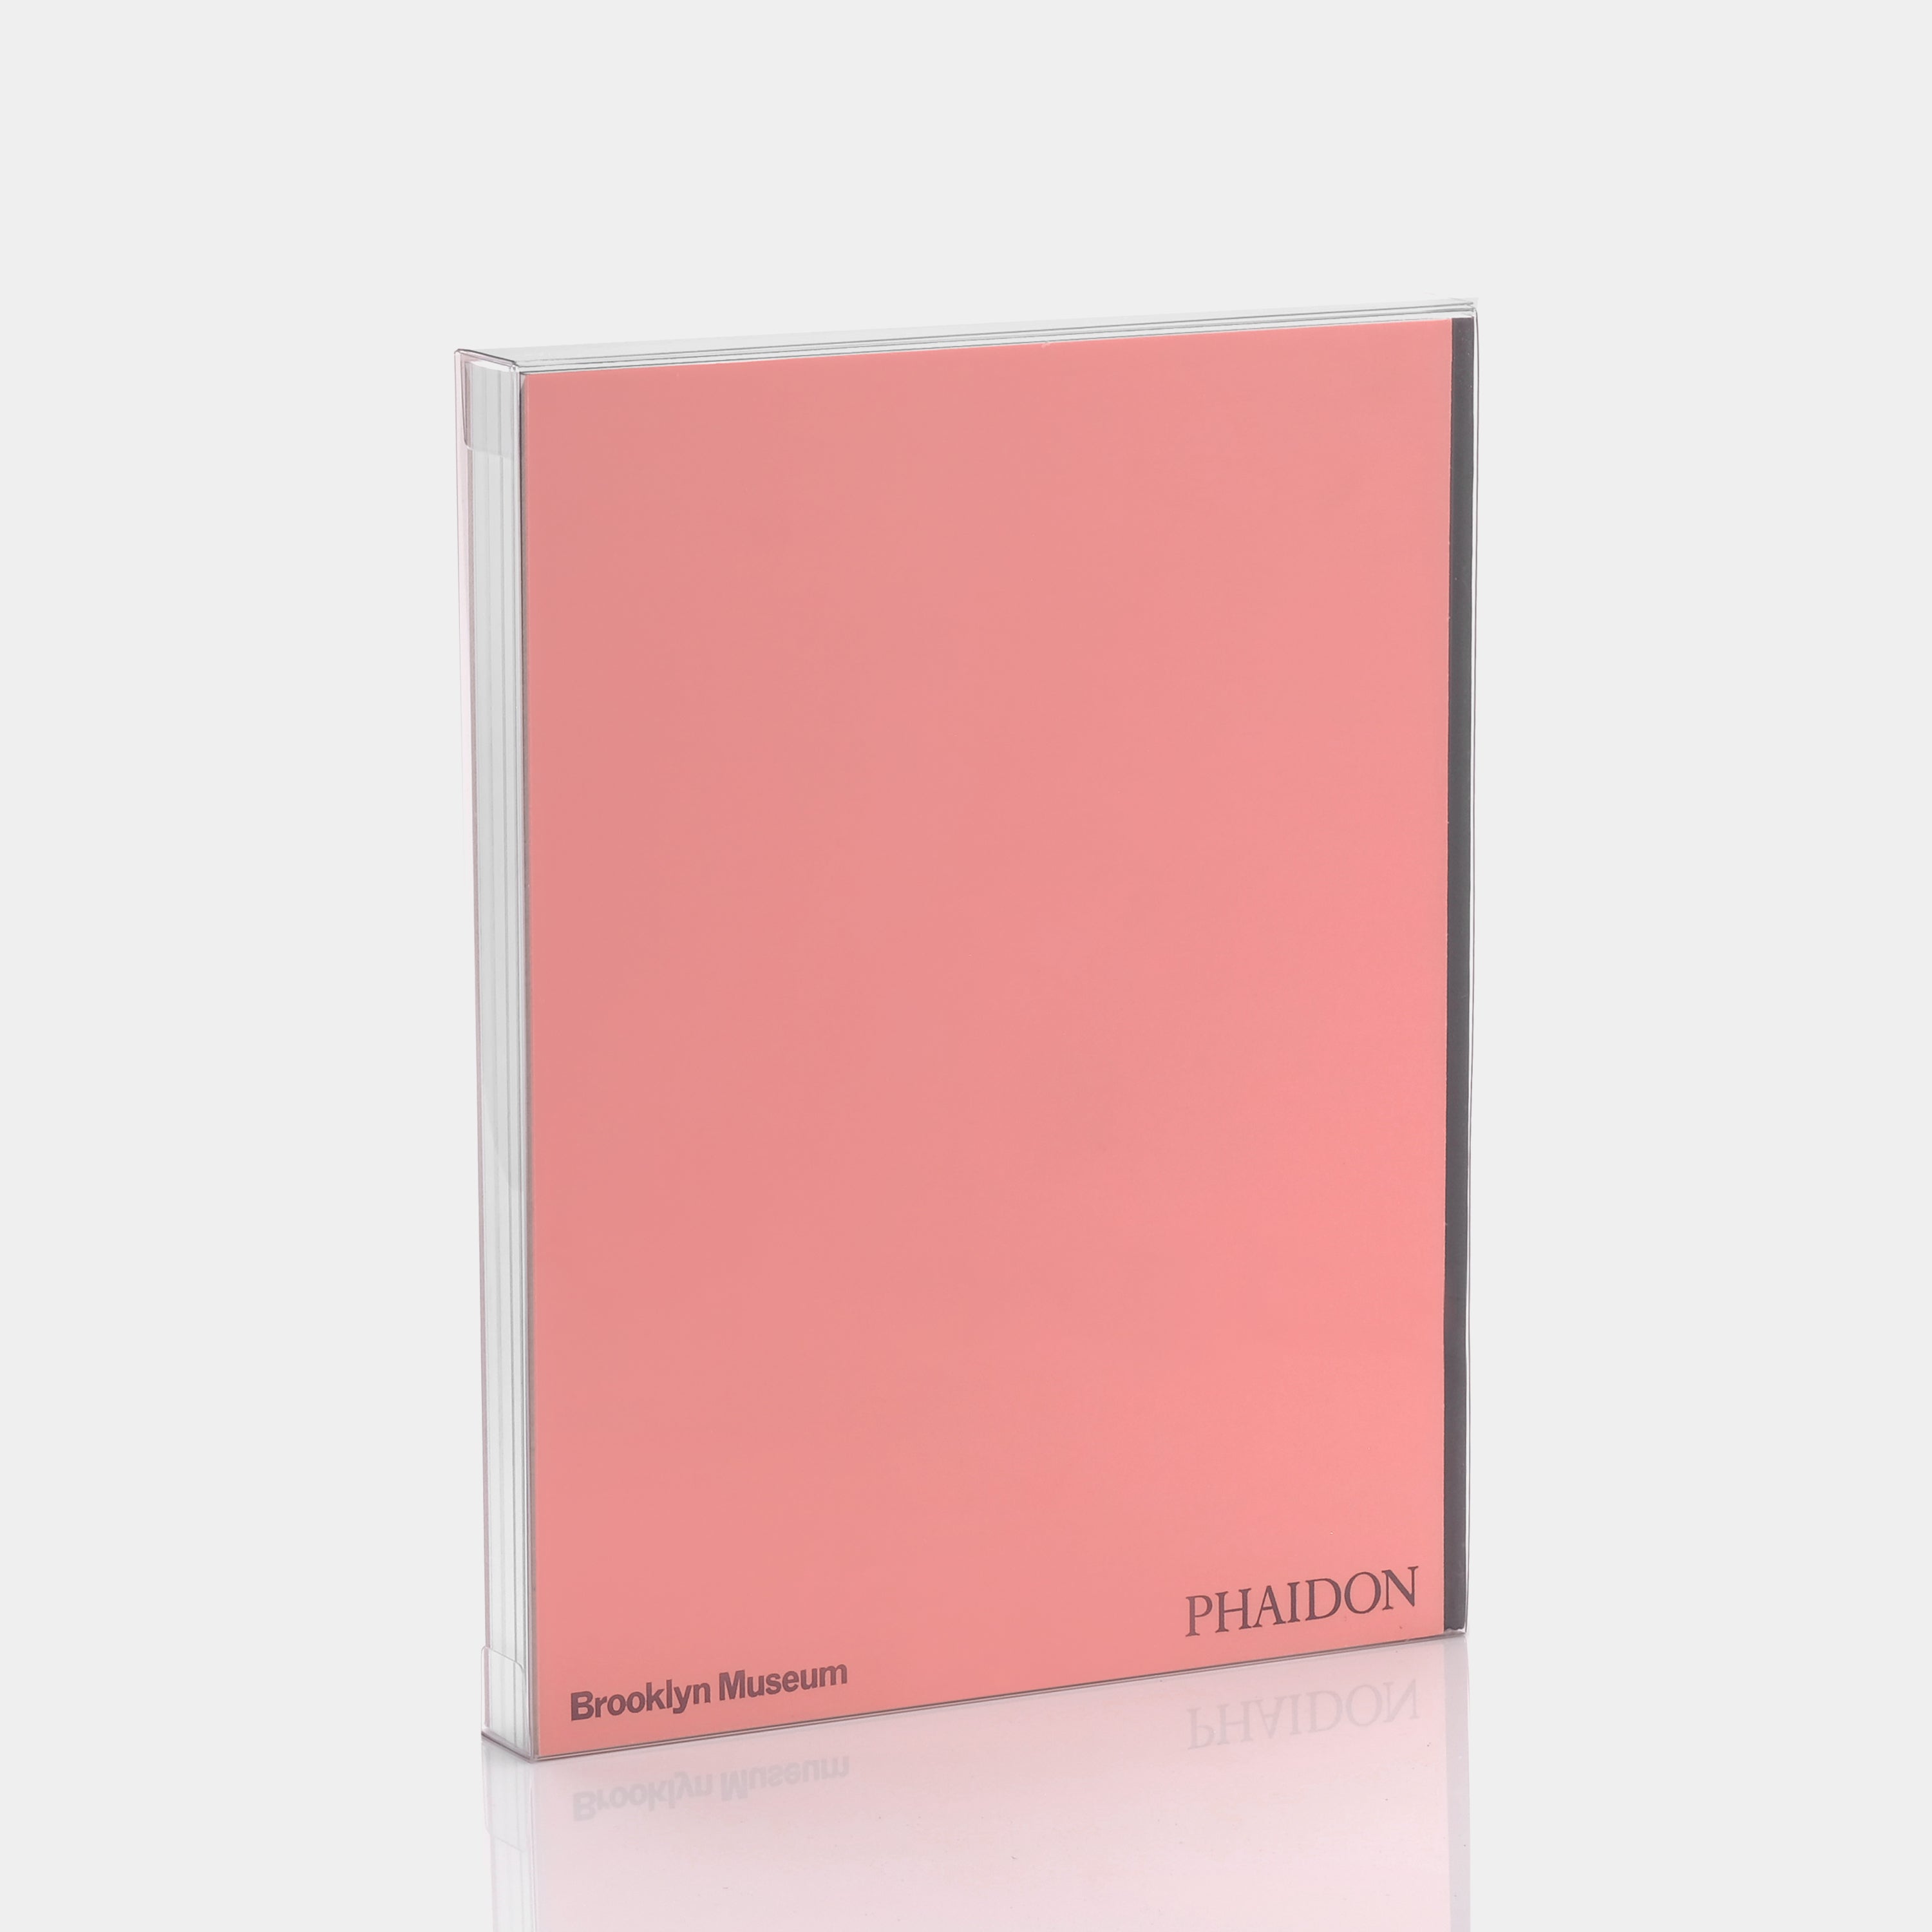 KAWS: WHAT PARTY (Black on Pink edition) Phaidon Book